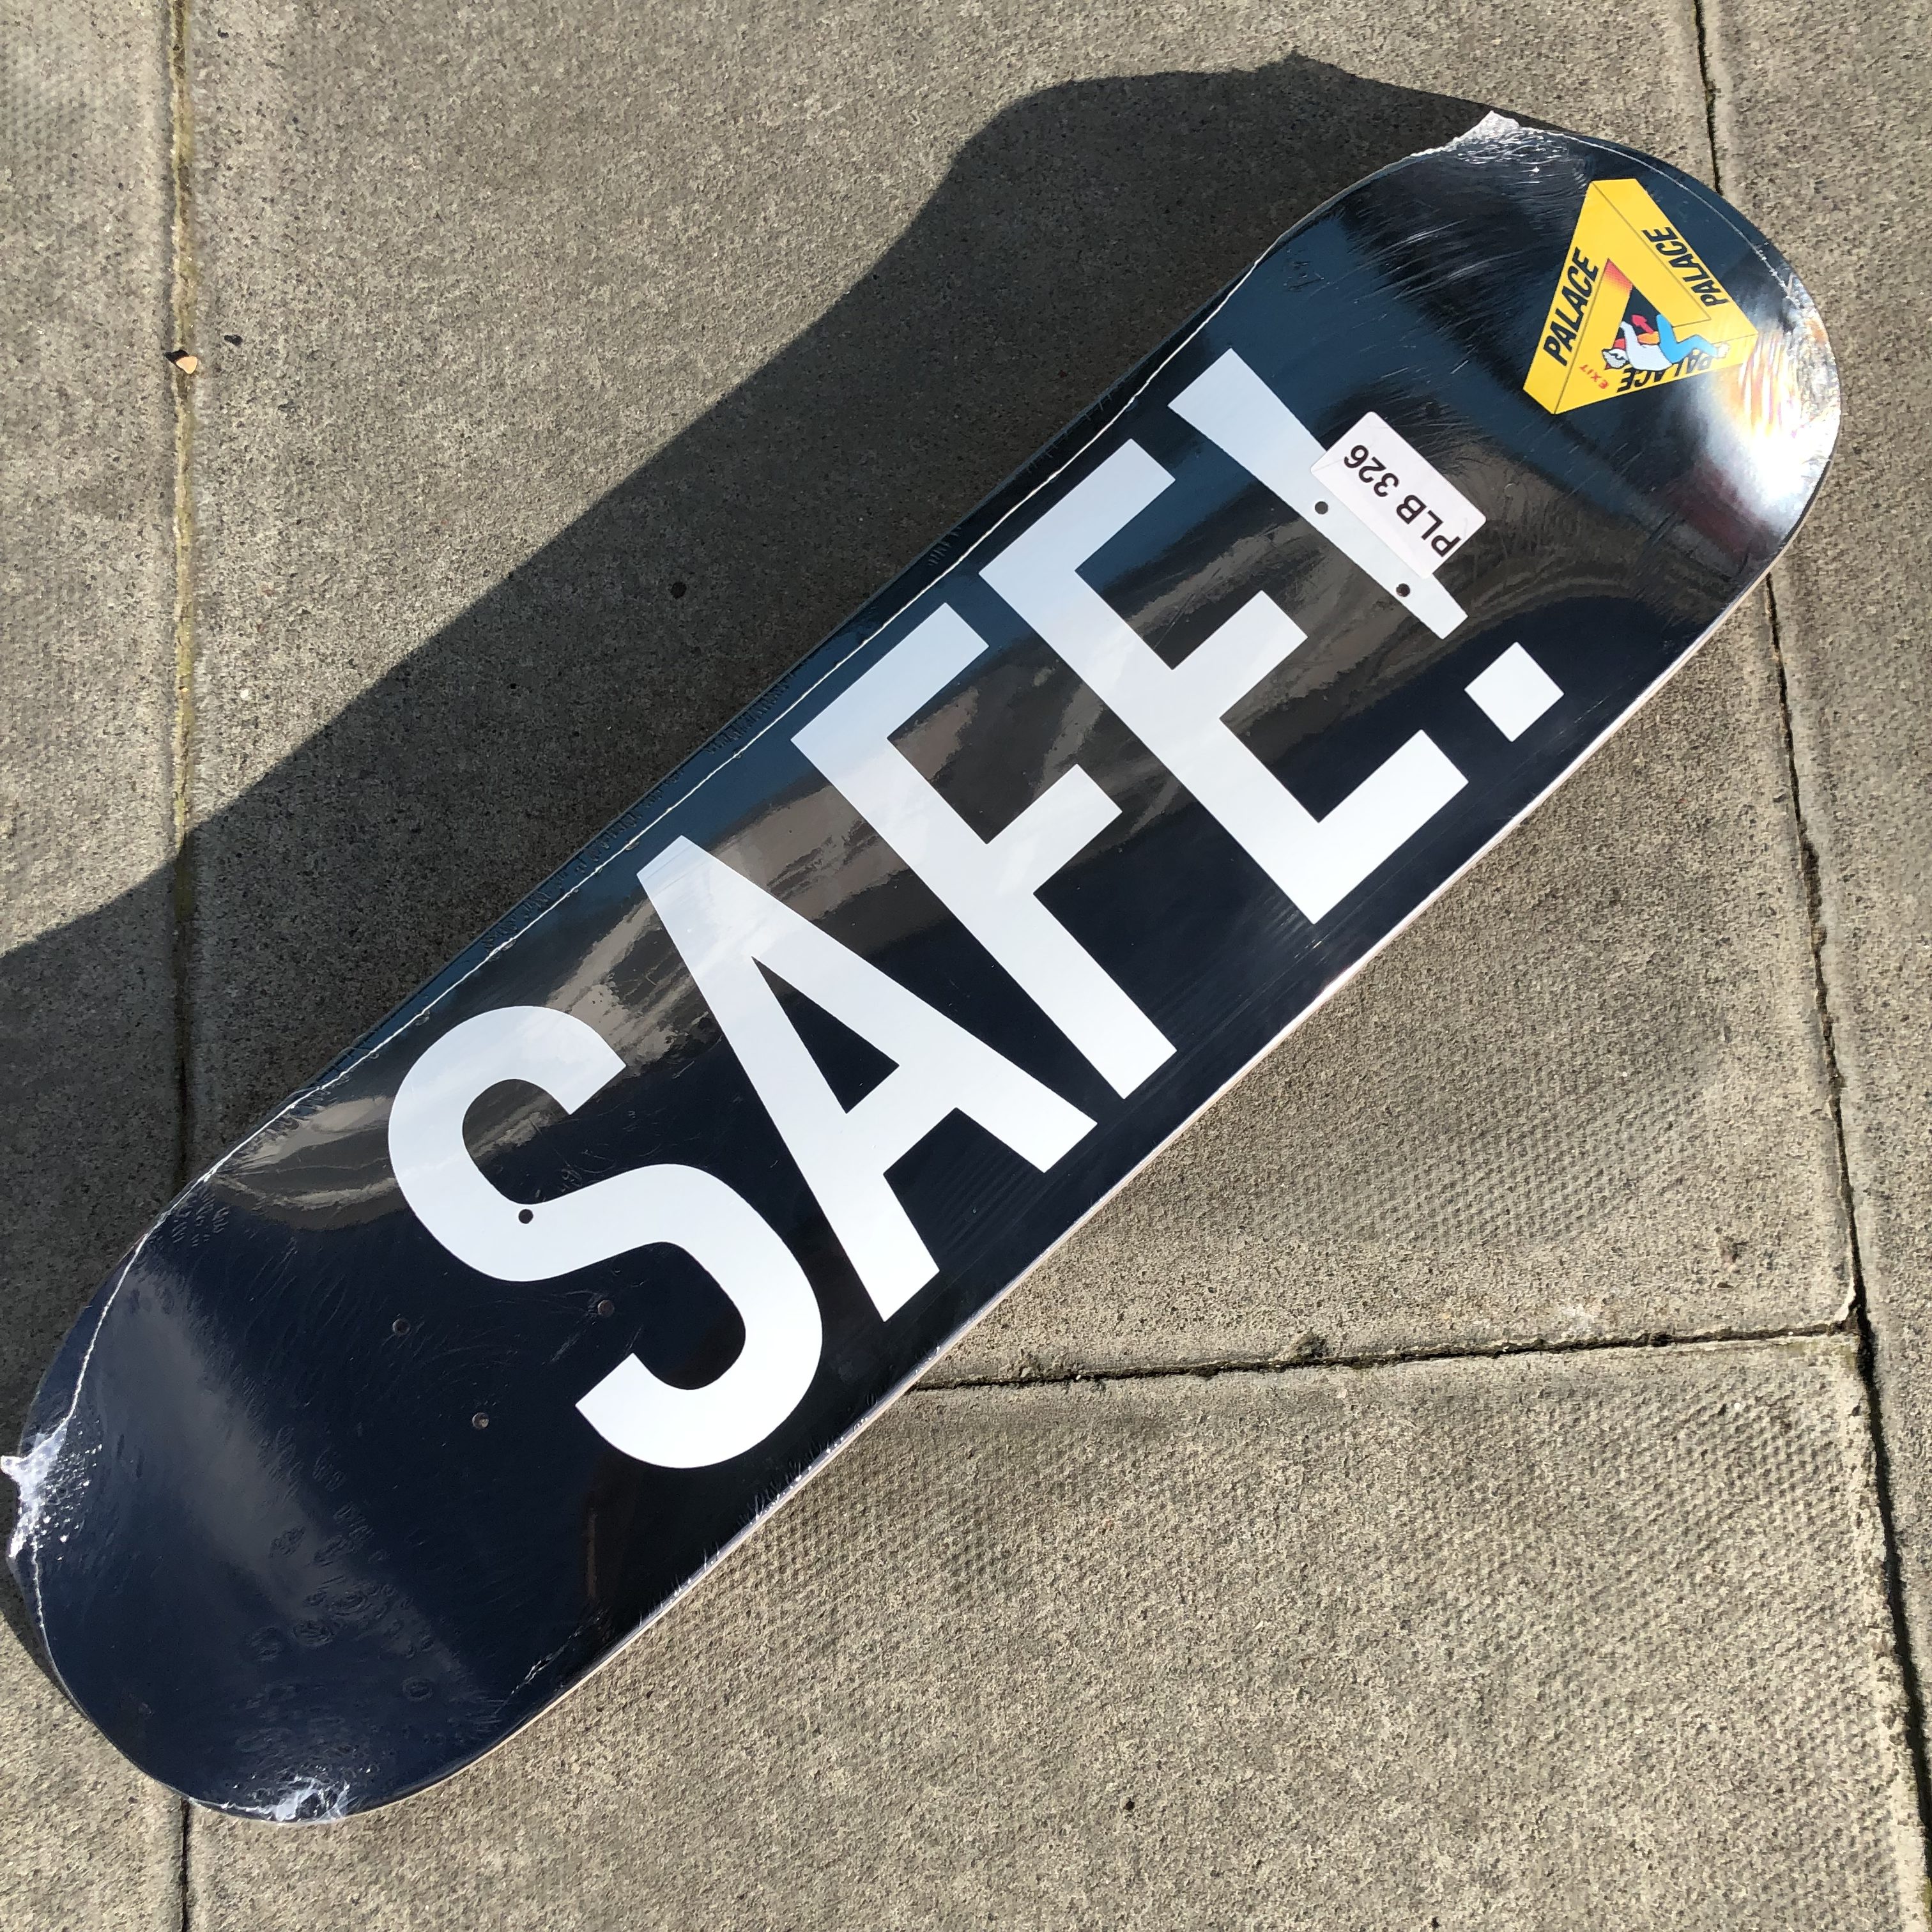 Palace Skateboards SAFE 8.5" Deck available now at Skate Pharm